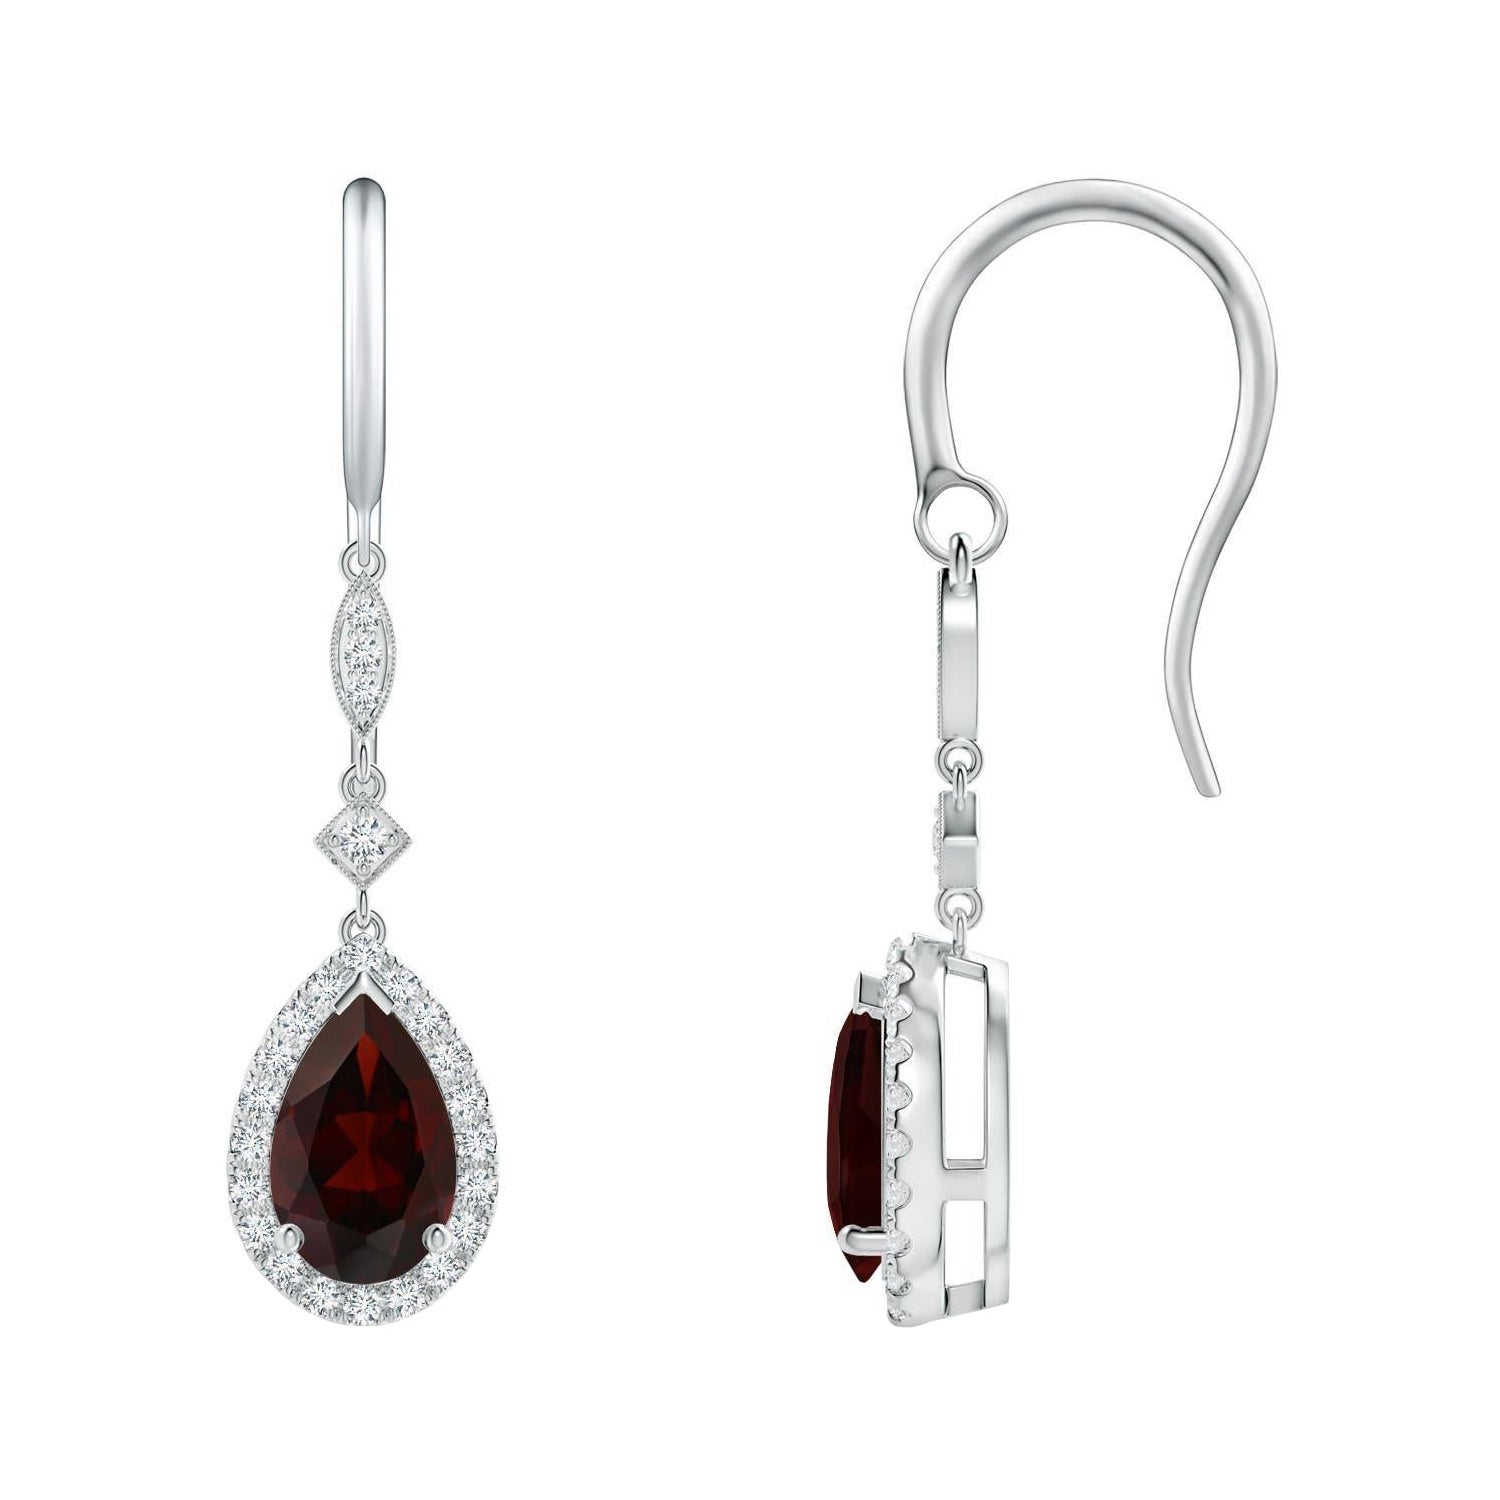 Natural Pear-Shaped 2.4ct Garnet Drop Earrings with Diamond in 14K White Gold For Sale